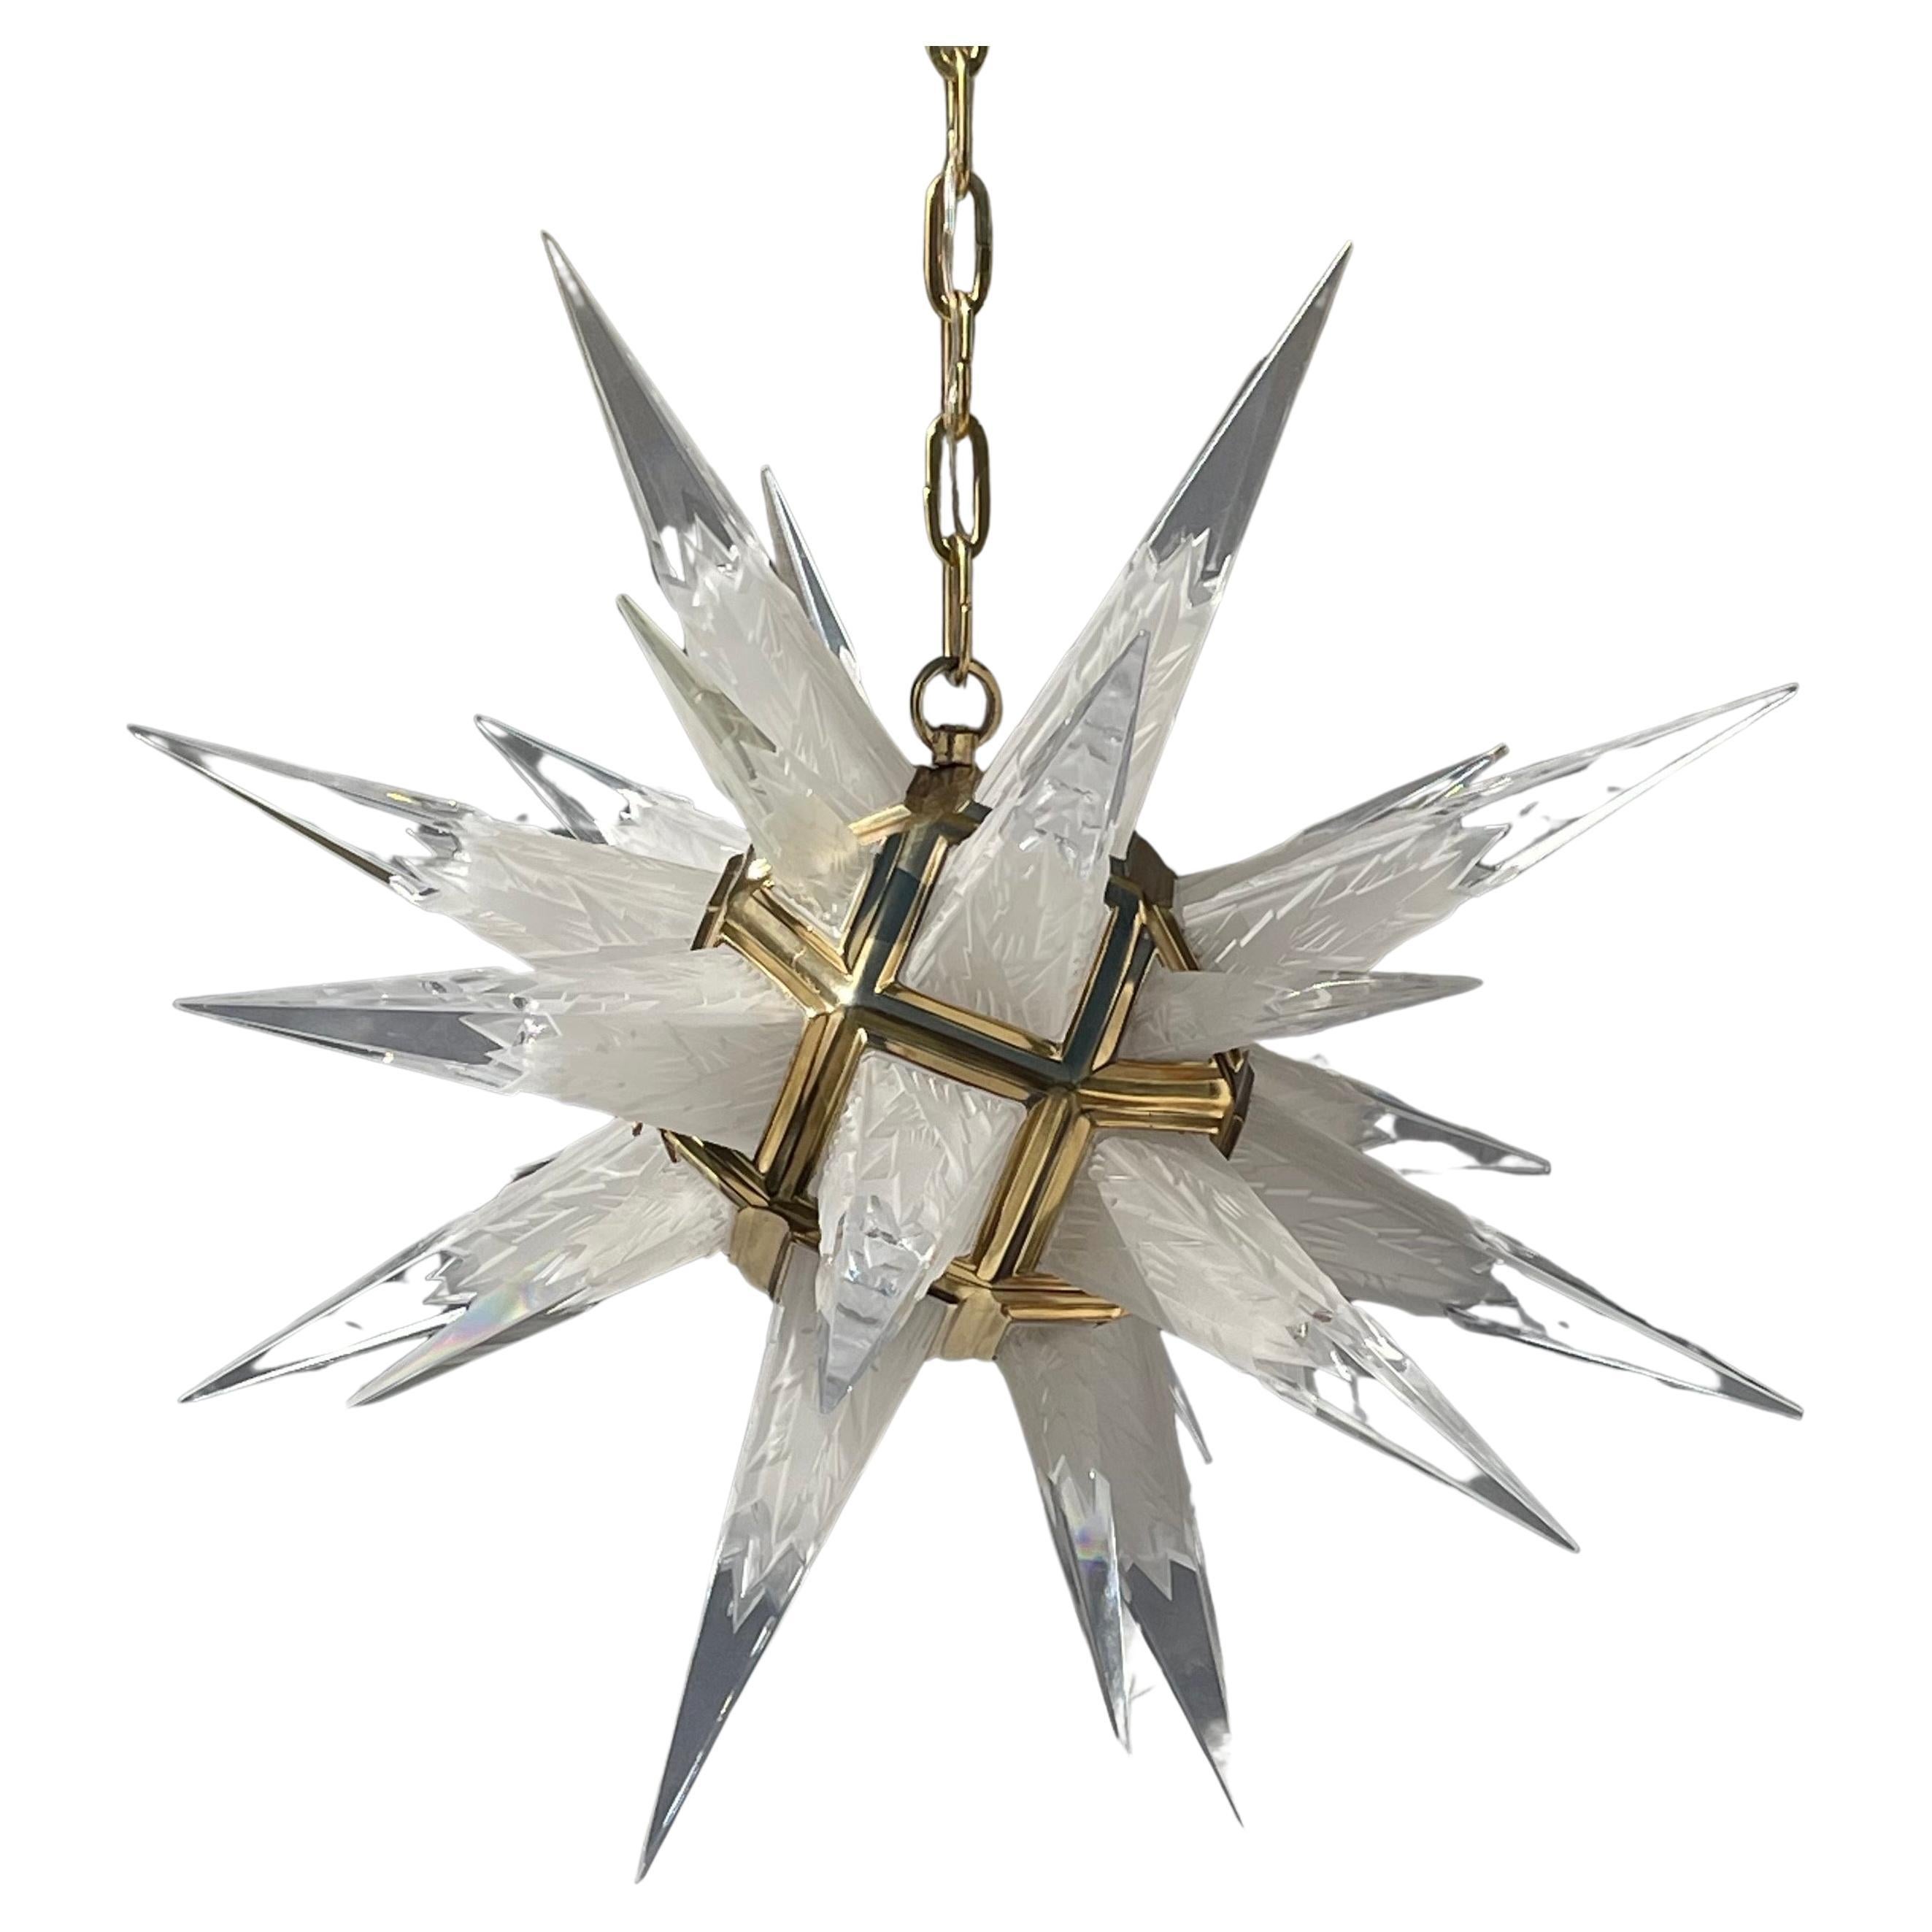 A Wonderful Etched Crystal Star / Sputnik In A Polished Brass / Bronze Housing Pendent This Chandelier Light Fixture Is Set Up With 2 Edison Interior Lights